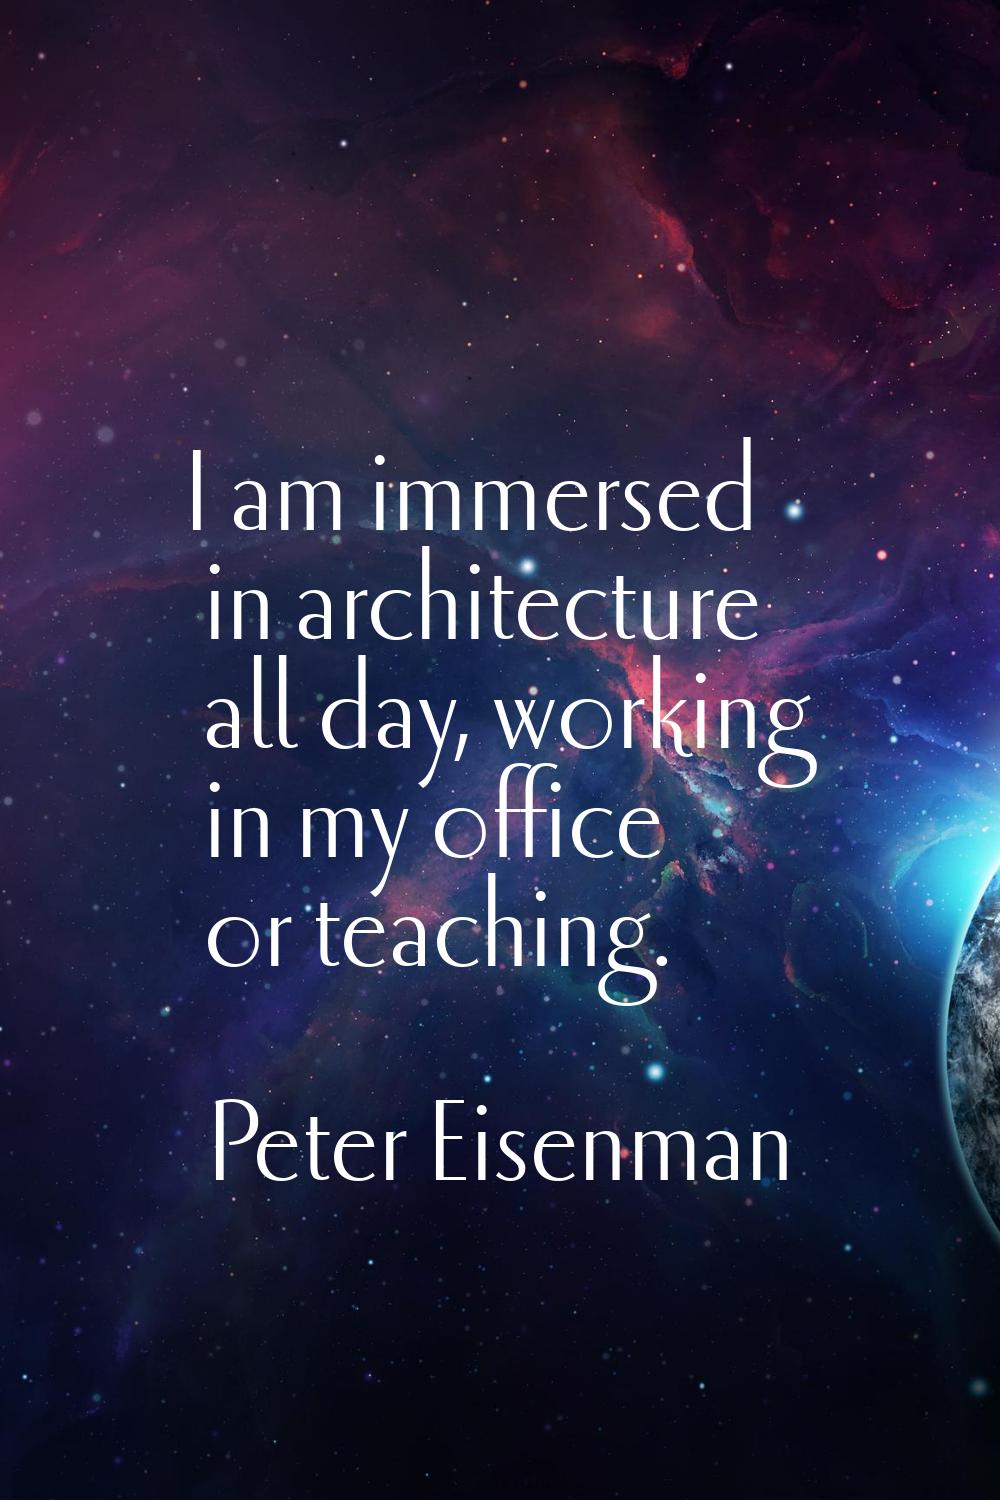 I am immersed in architecture all day, working in my office or teaching.